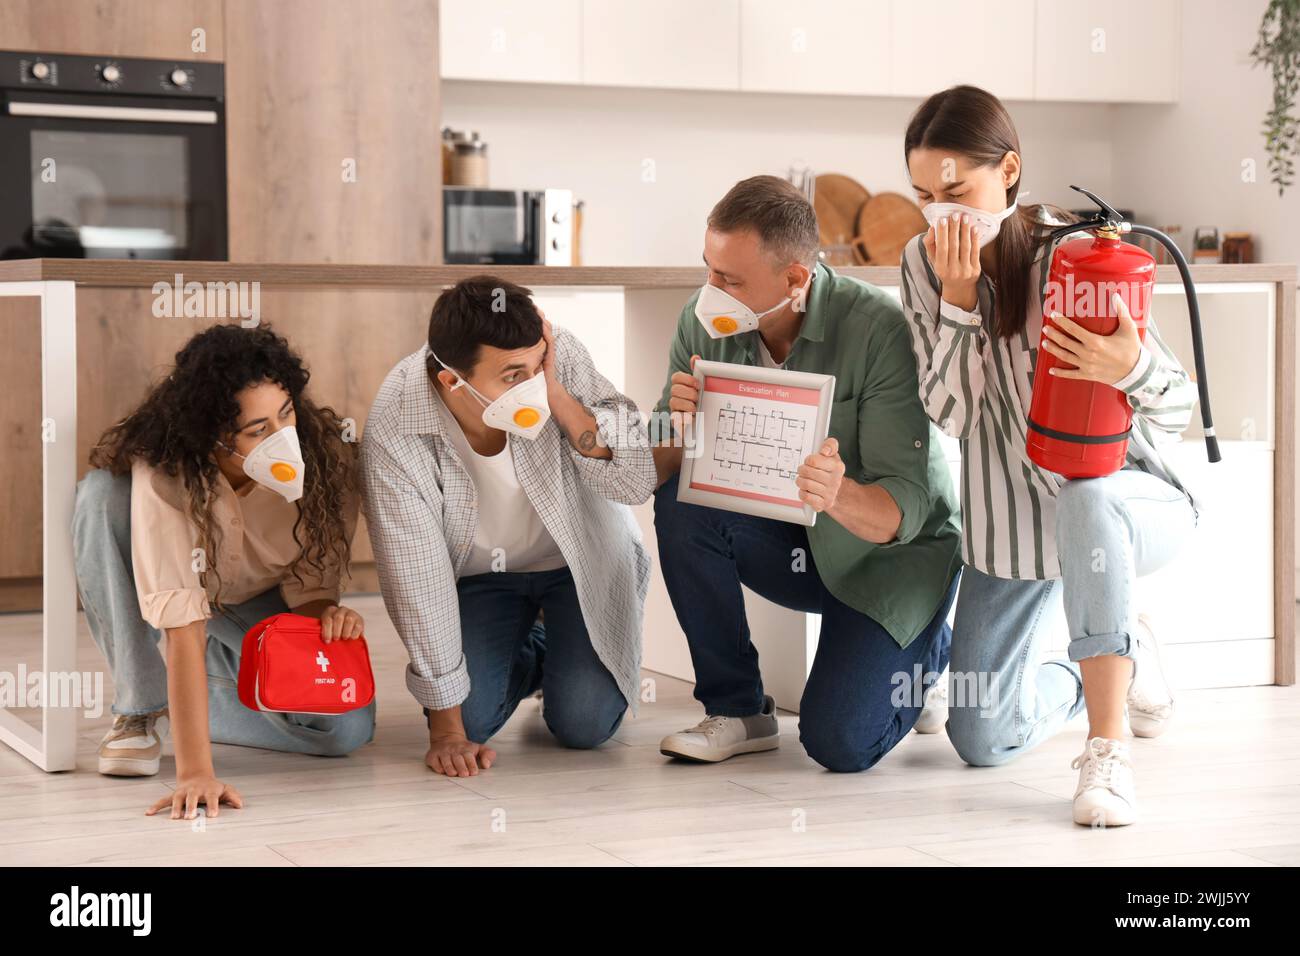 People with evacuation plan, first aid kit and fire extinguisher in burning kitchen Stock Photo